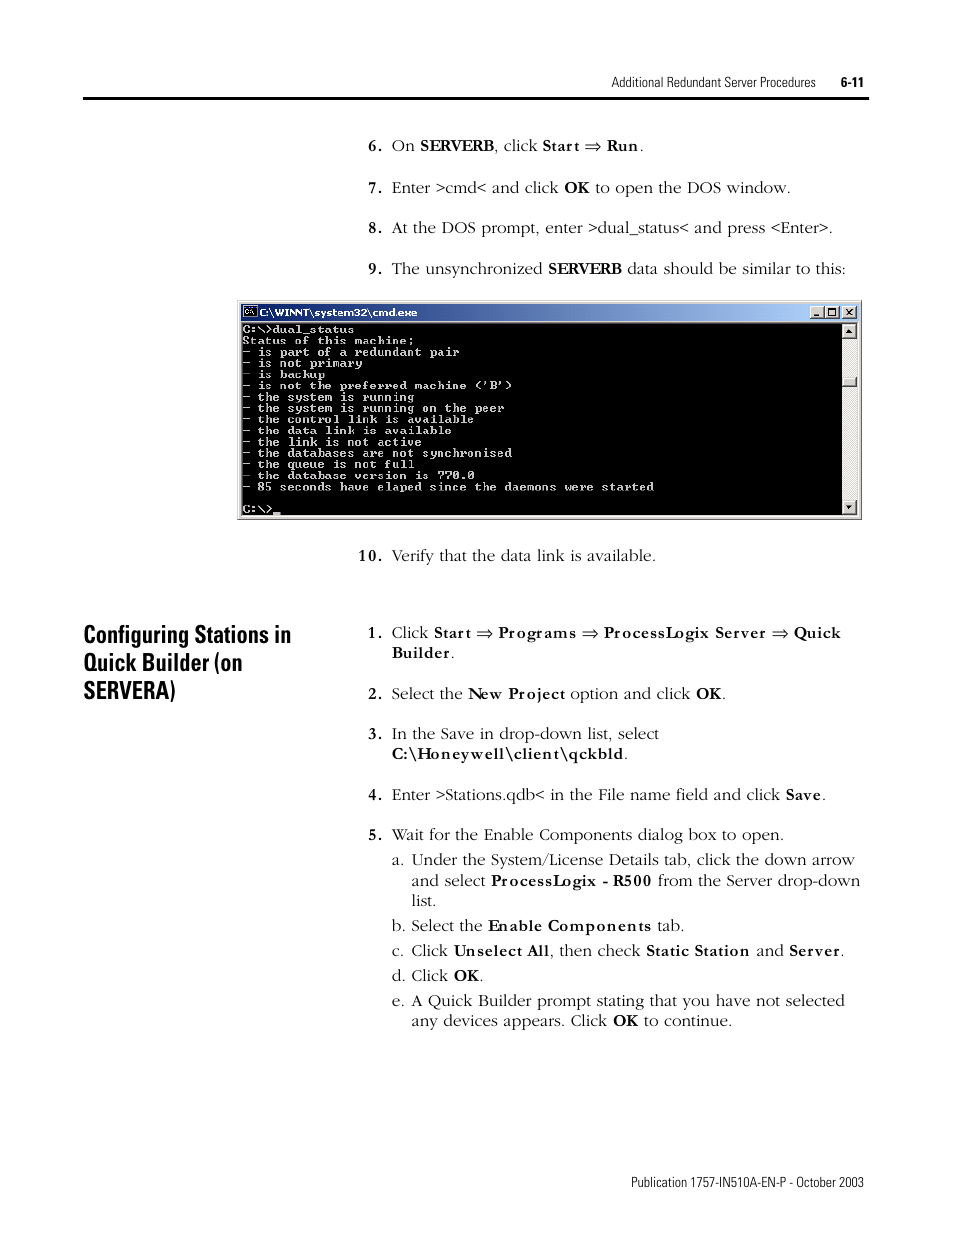 Configuring stations in quick builder (on servera) | Rockwell Automation 1757-SWKIT5100 ProcessLogix R510.0 Installation and Upgrade Guide User Manual | Page 171 / 271